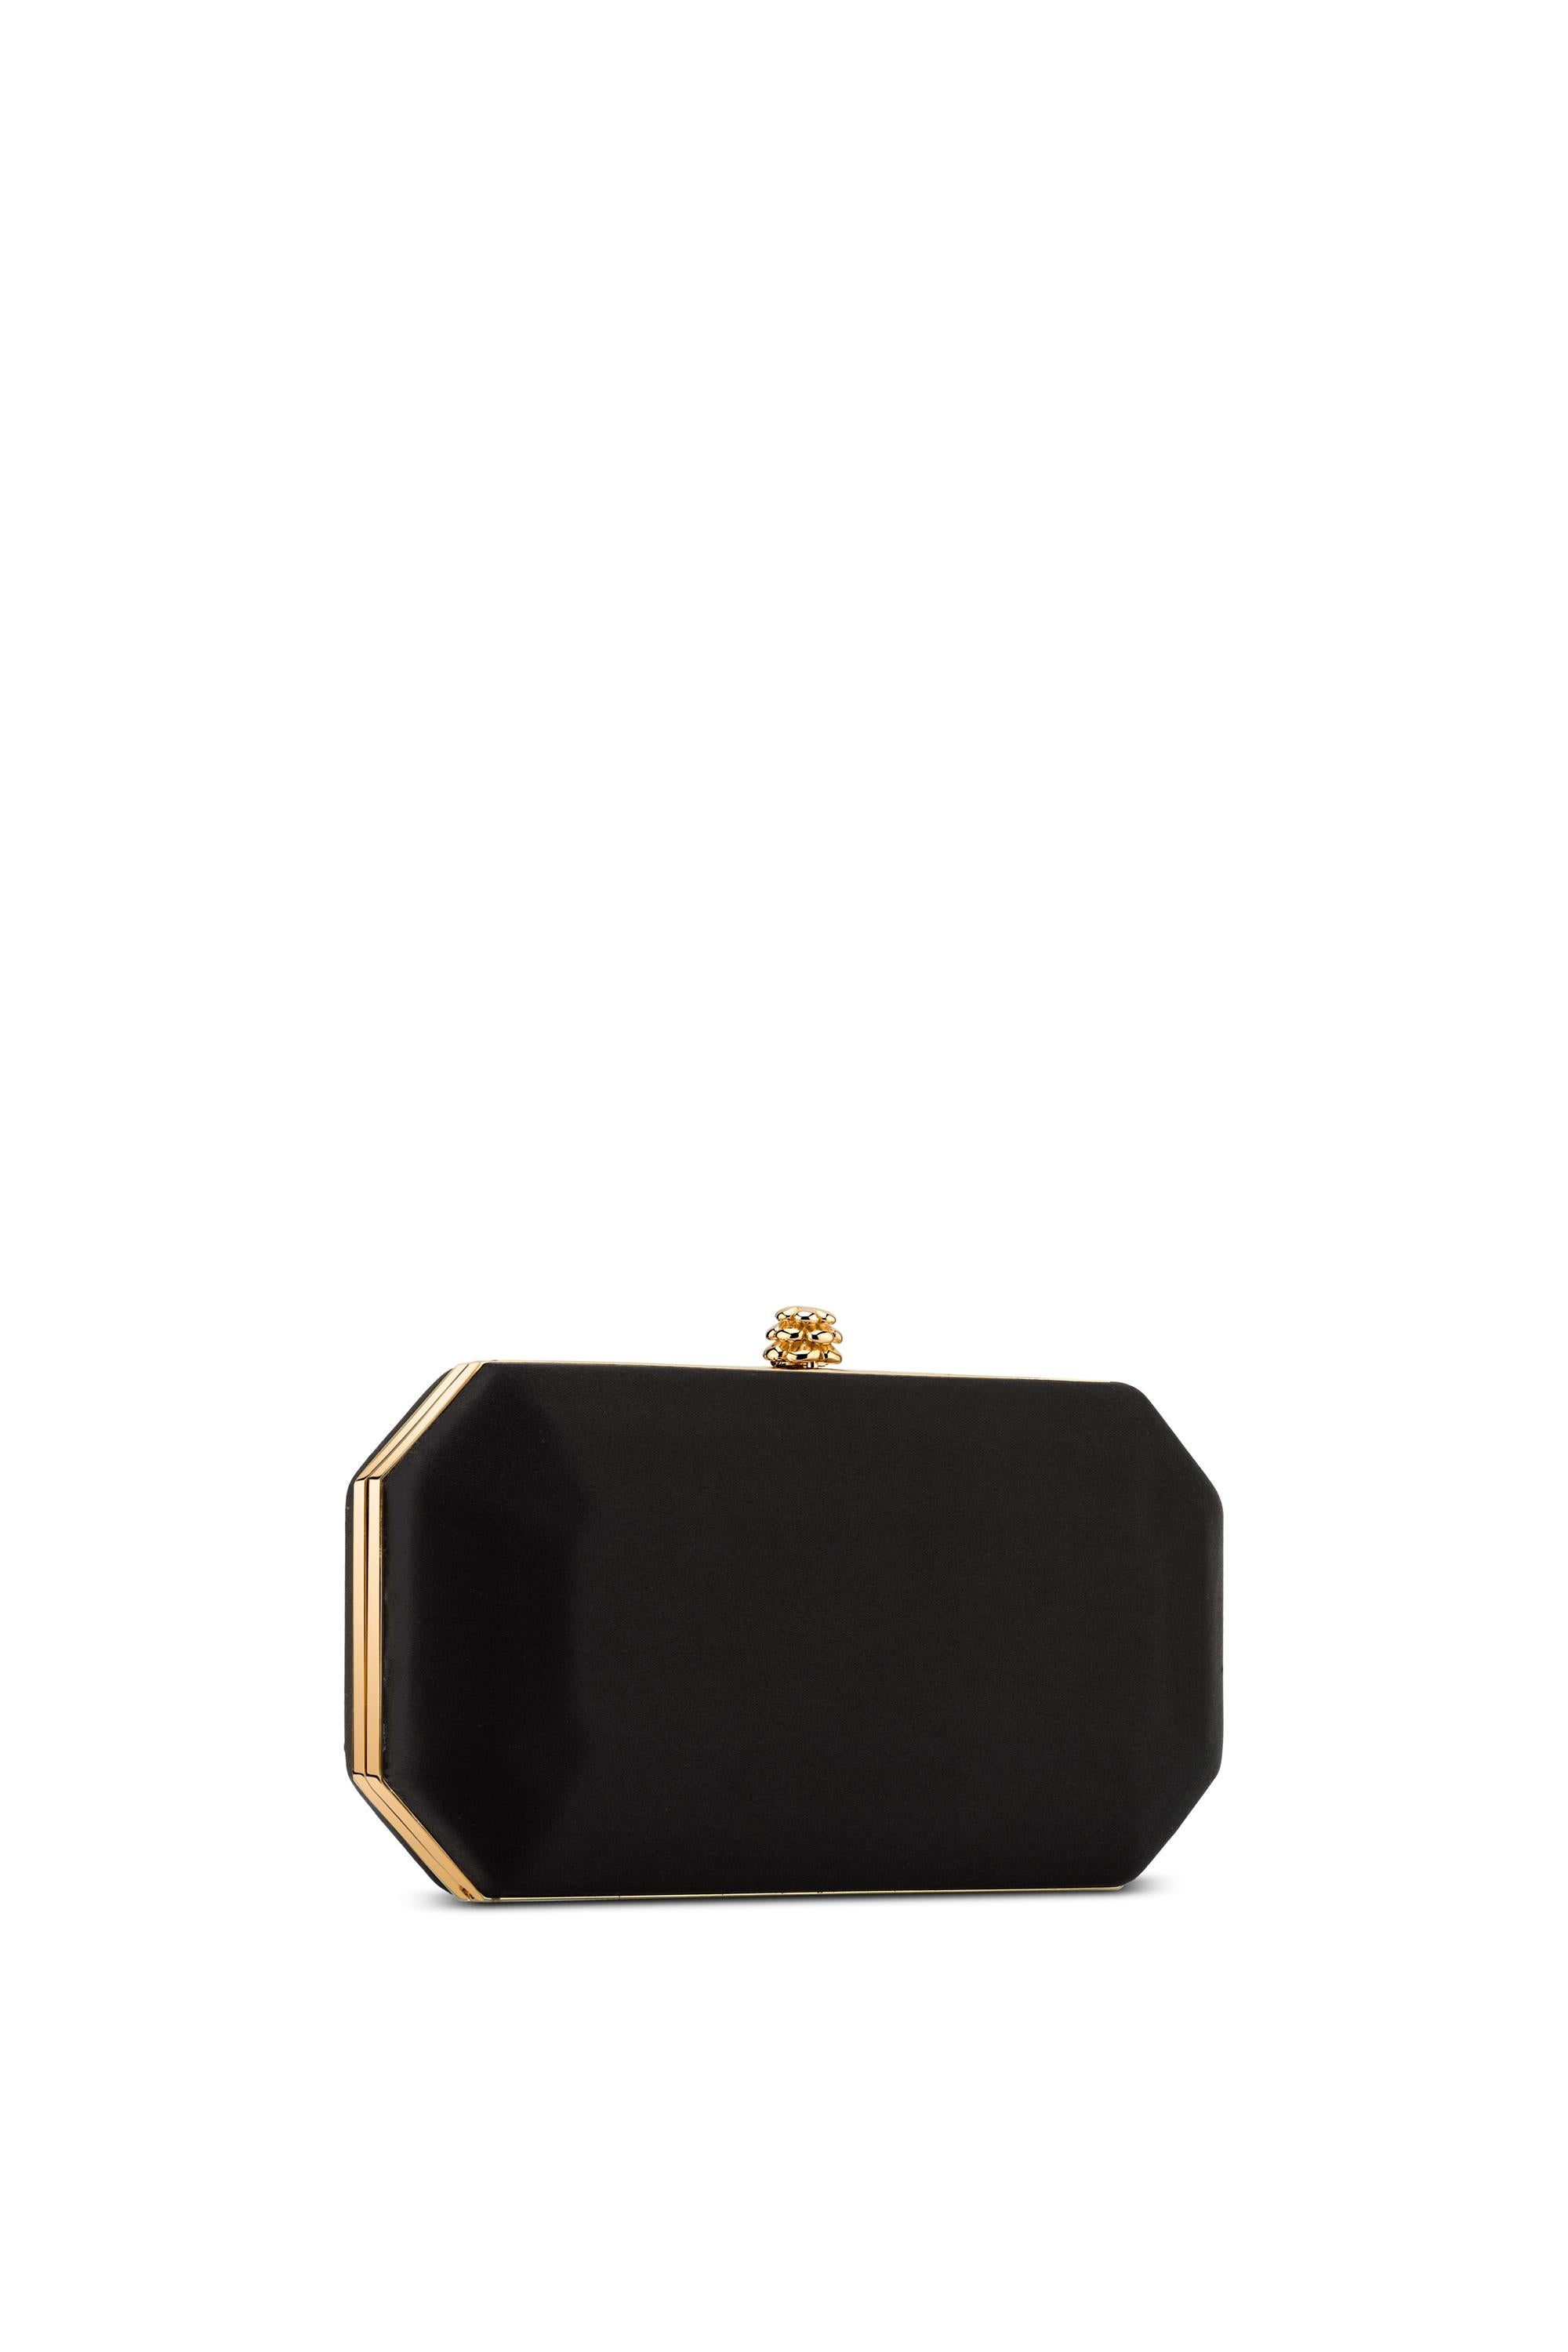 TYLER ELLIS Perry Small Clutch Black Satin Gold Hardware In New Condition In Los Angeles, CA